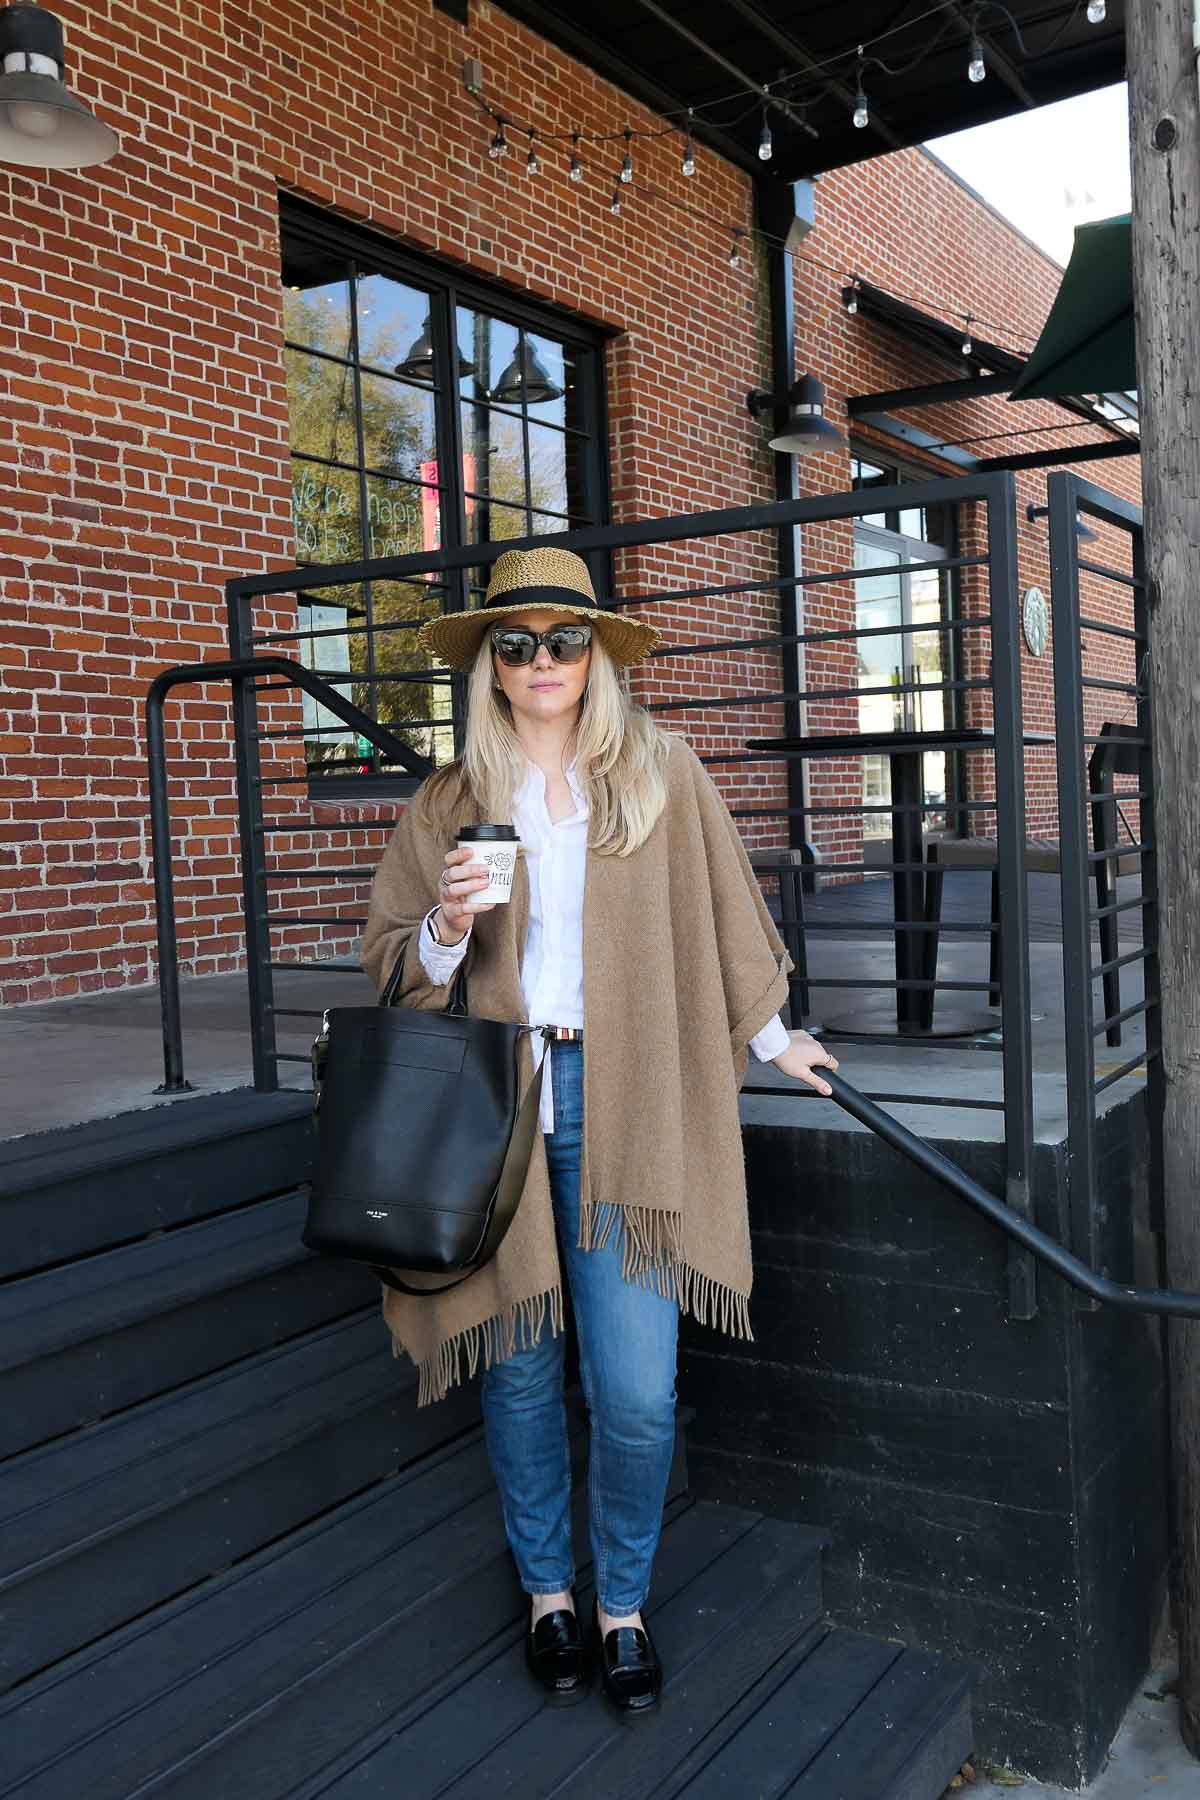 Investing in Quality Clothes - Jeans, Tan Poncho, Straw Hat Outfit for Late Winter